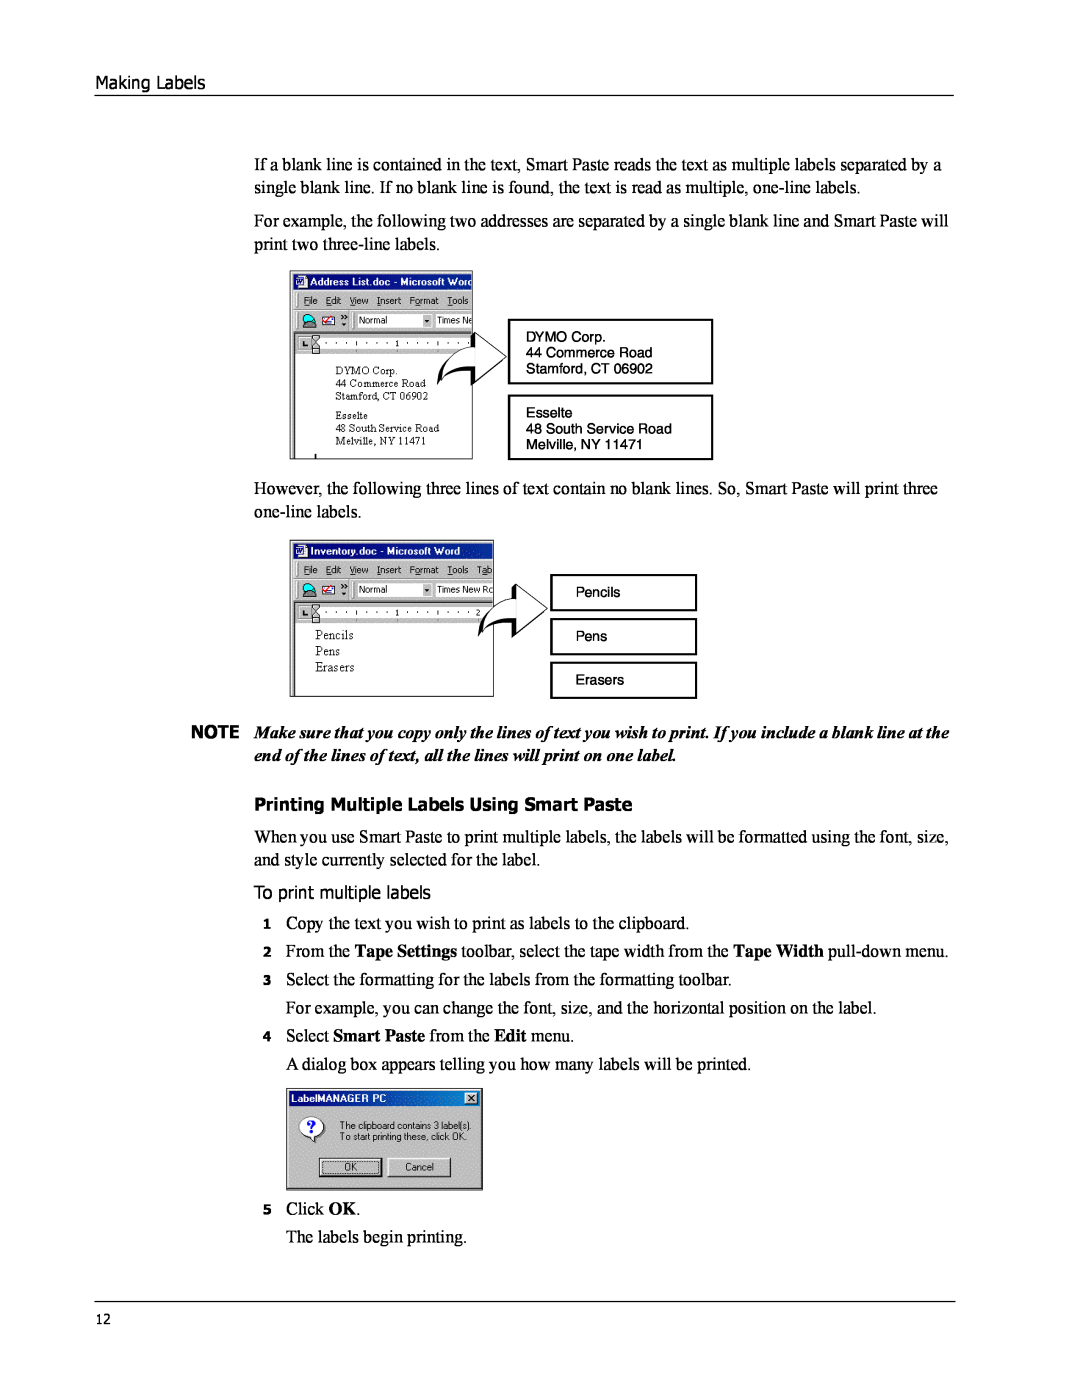 Dymo Label Manager PC manual Printing Multiple Labels Using Smart Paste 